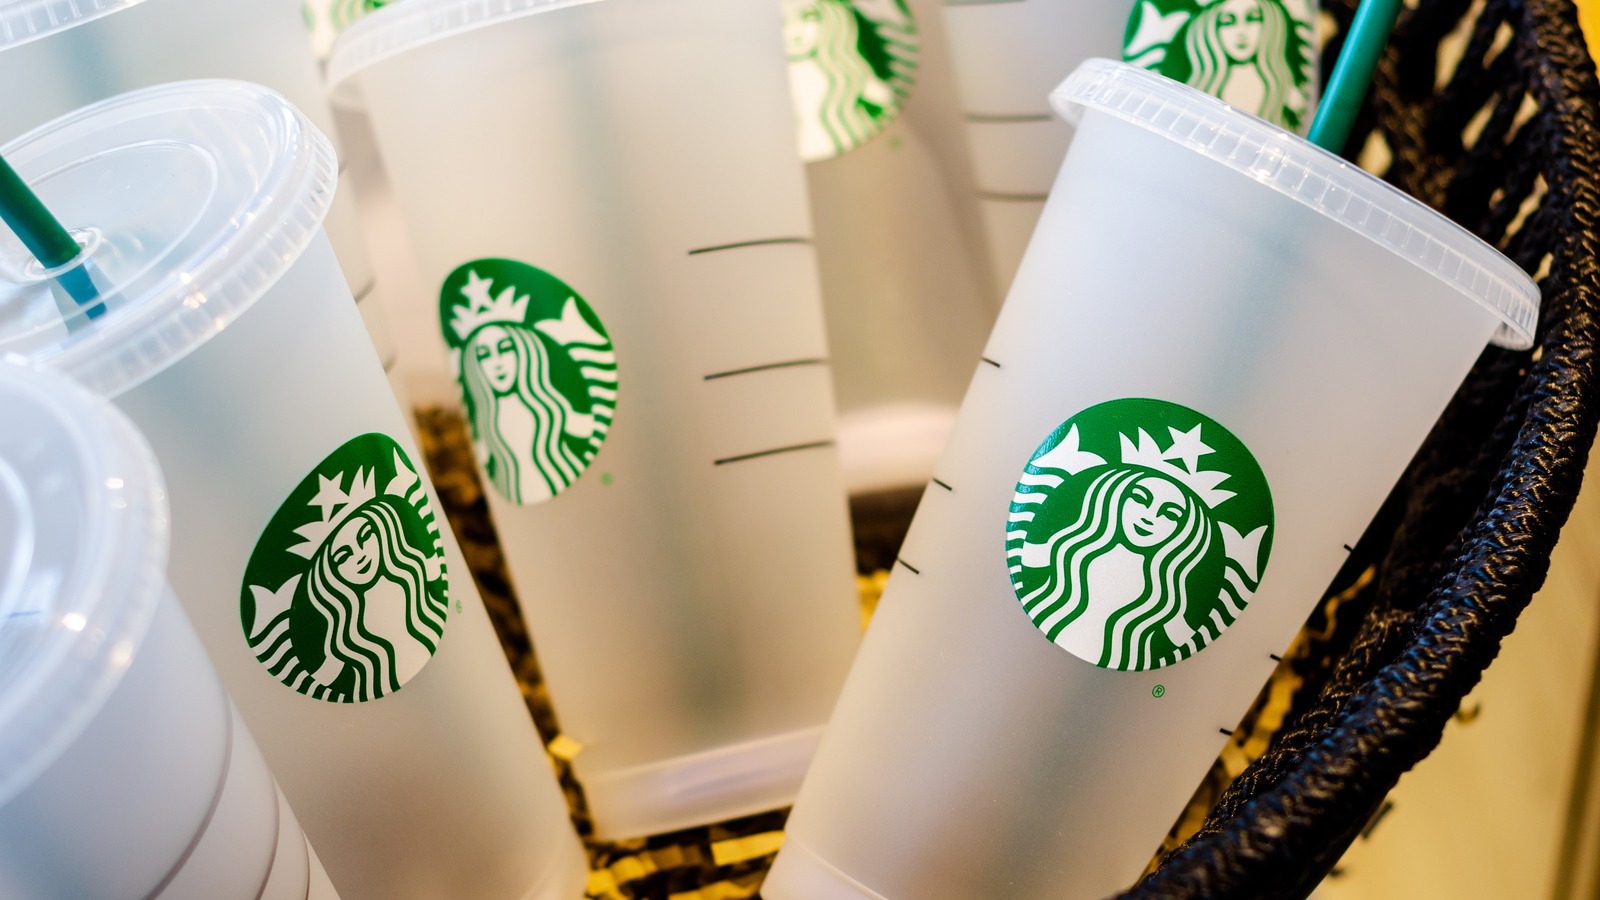 Starbucks coffee and drink cups: Different designs over the years